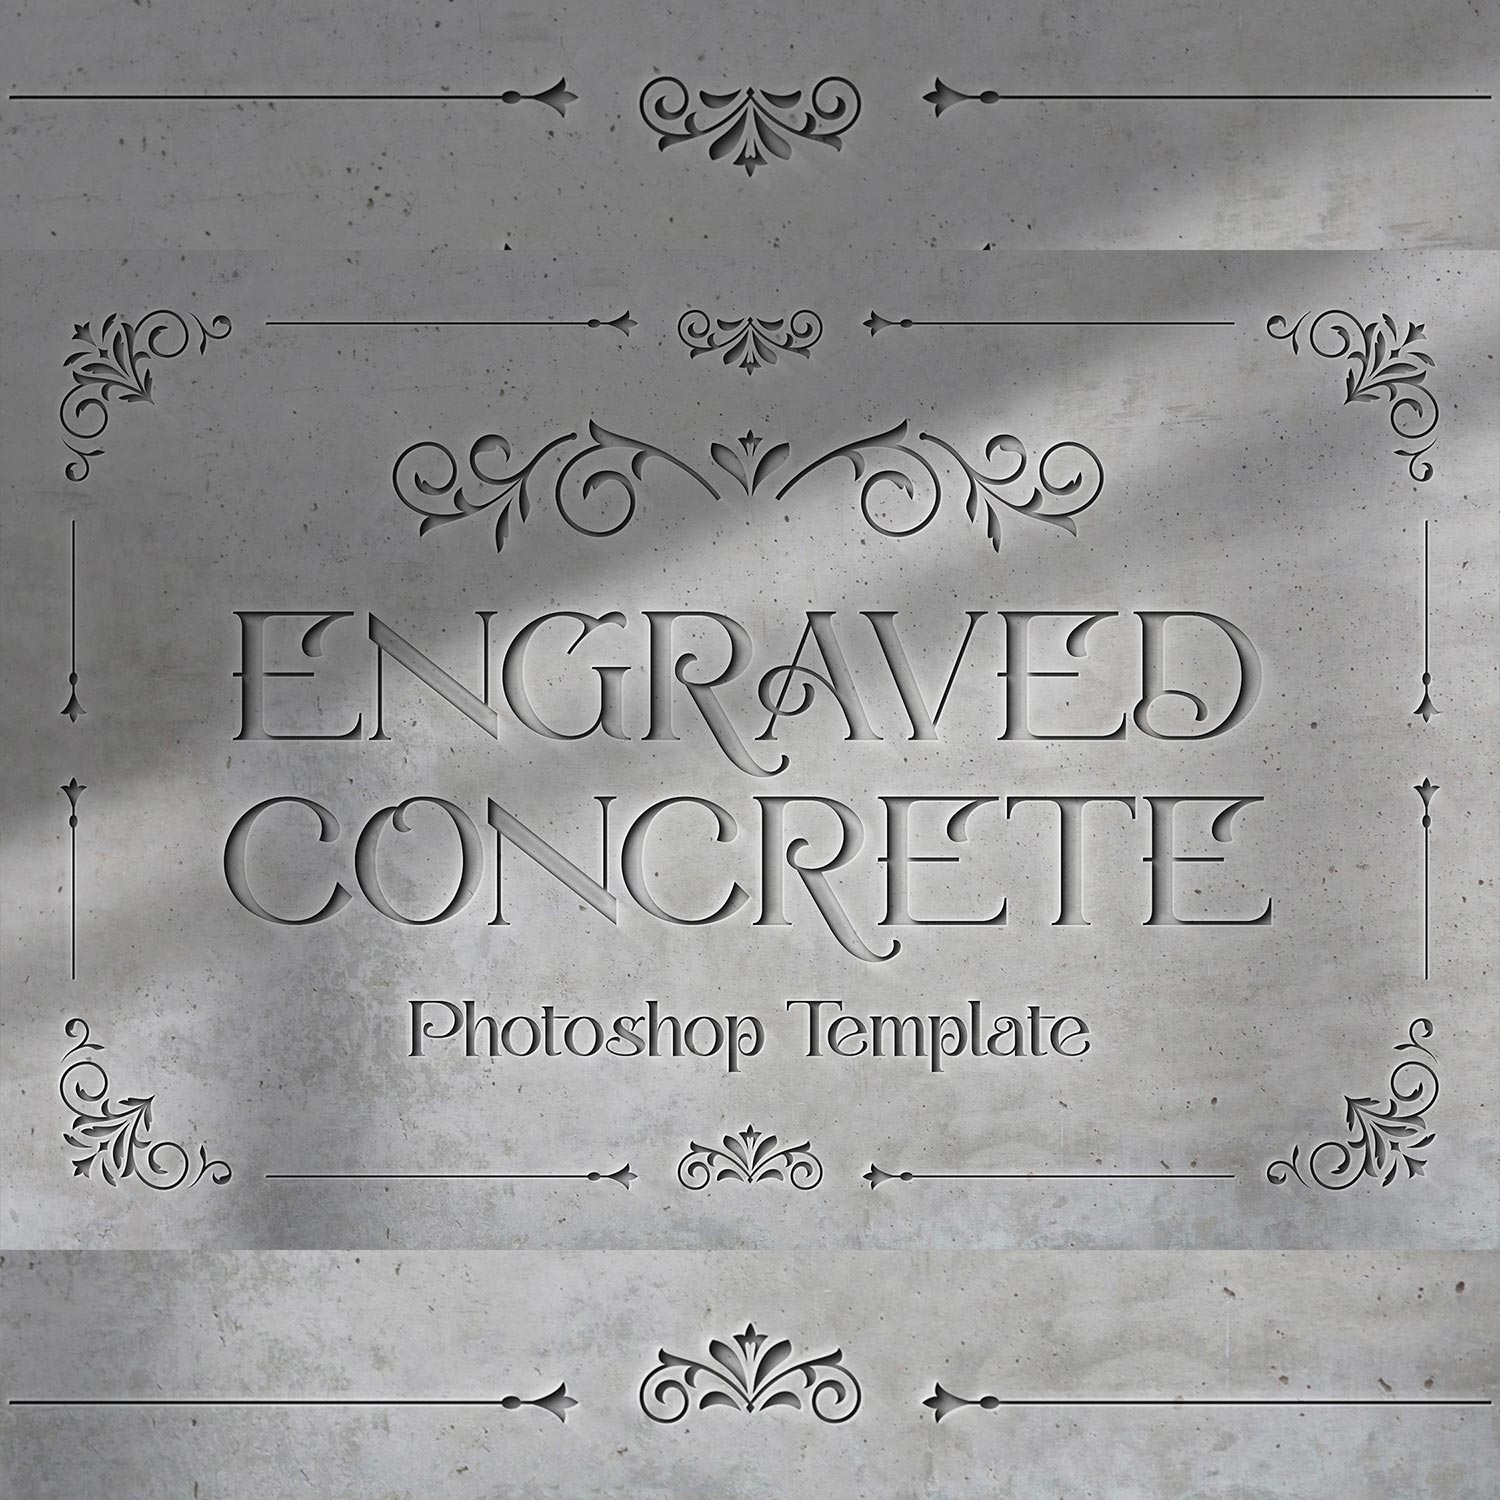 Engraved Concrete Template cover image.